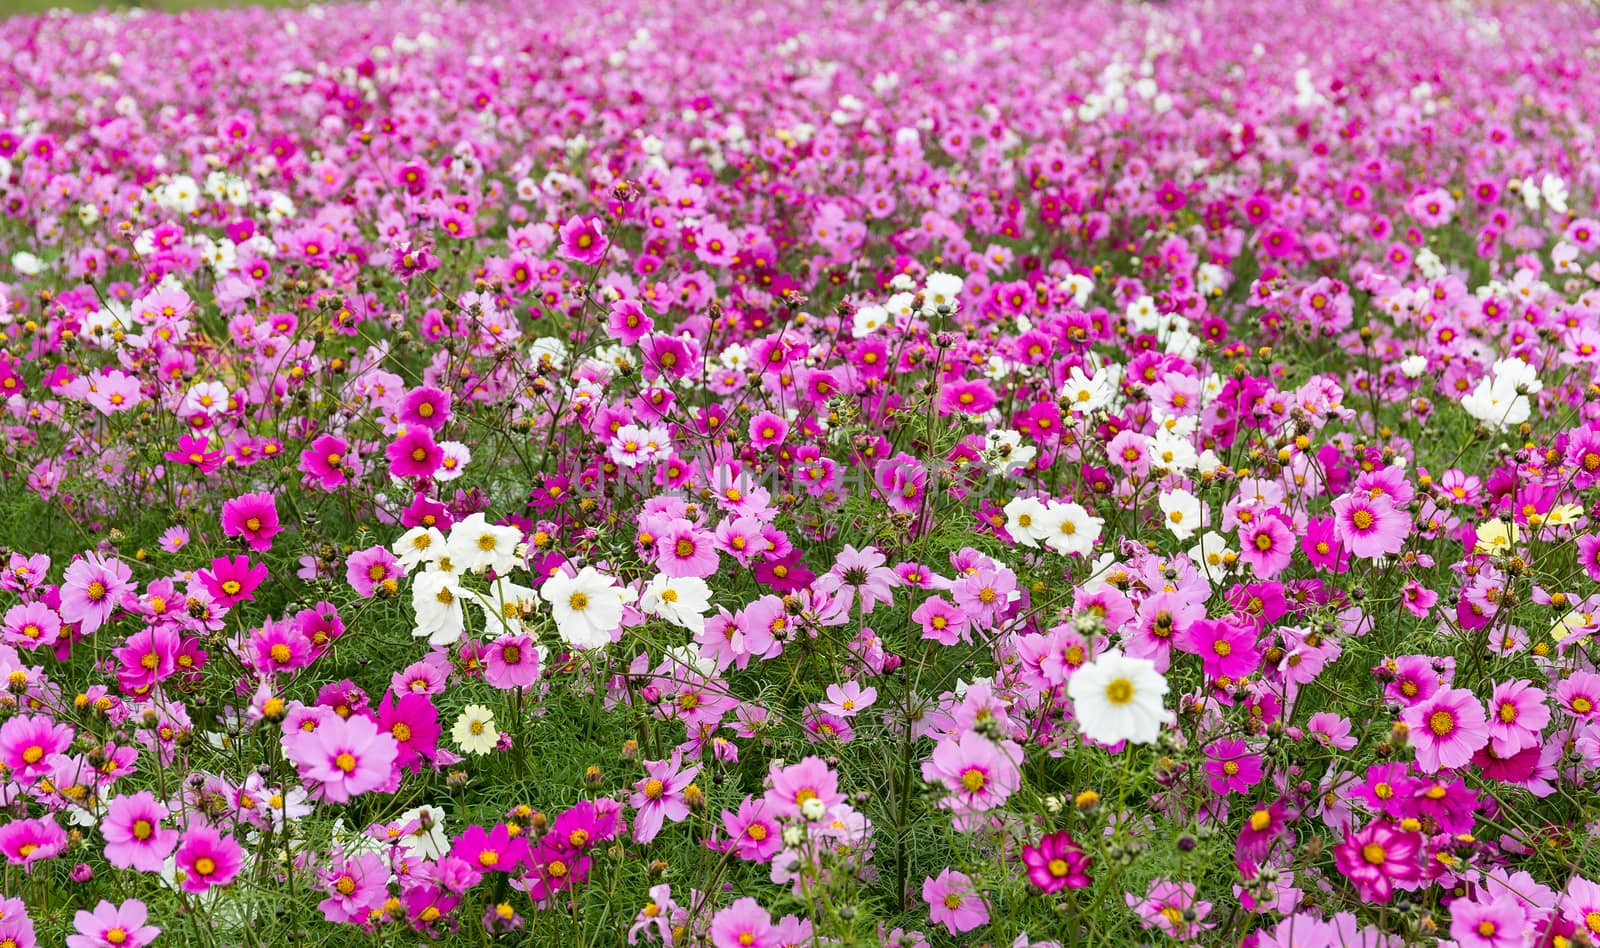 Cosmos flowers by leungchopan